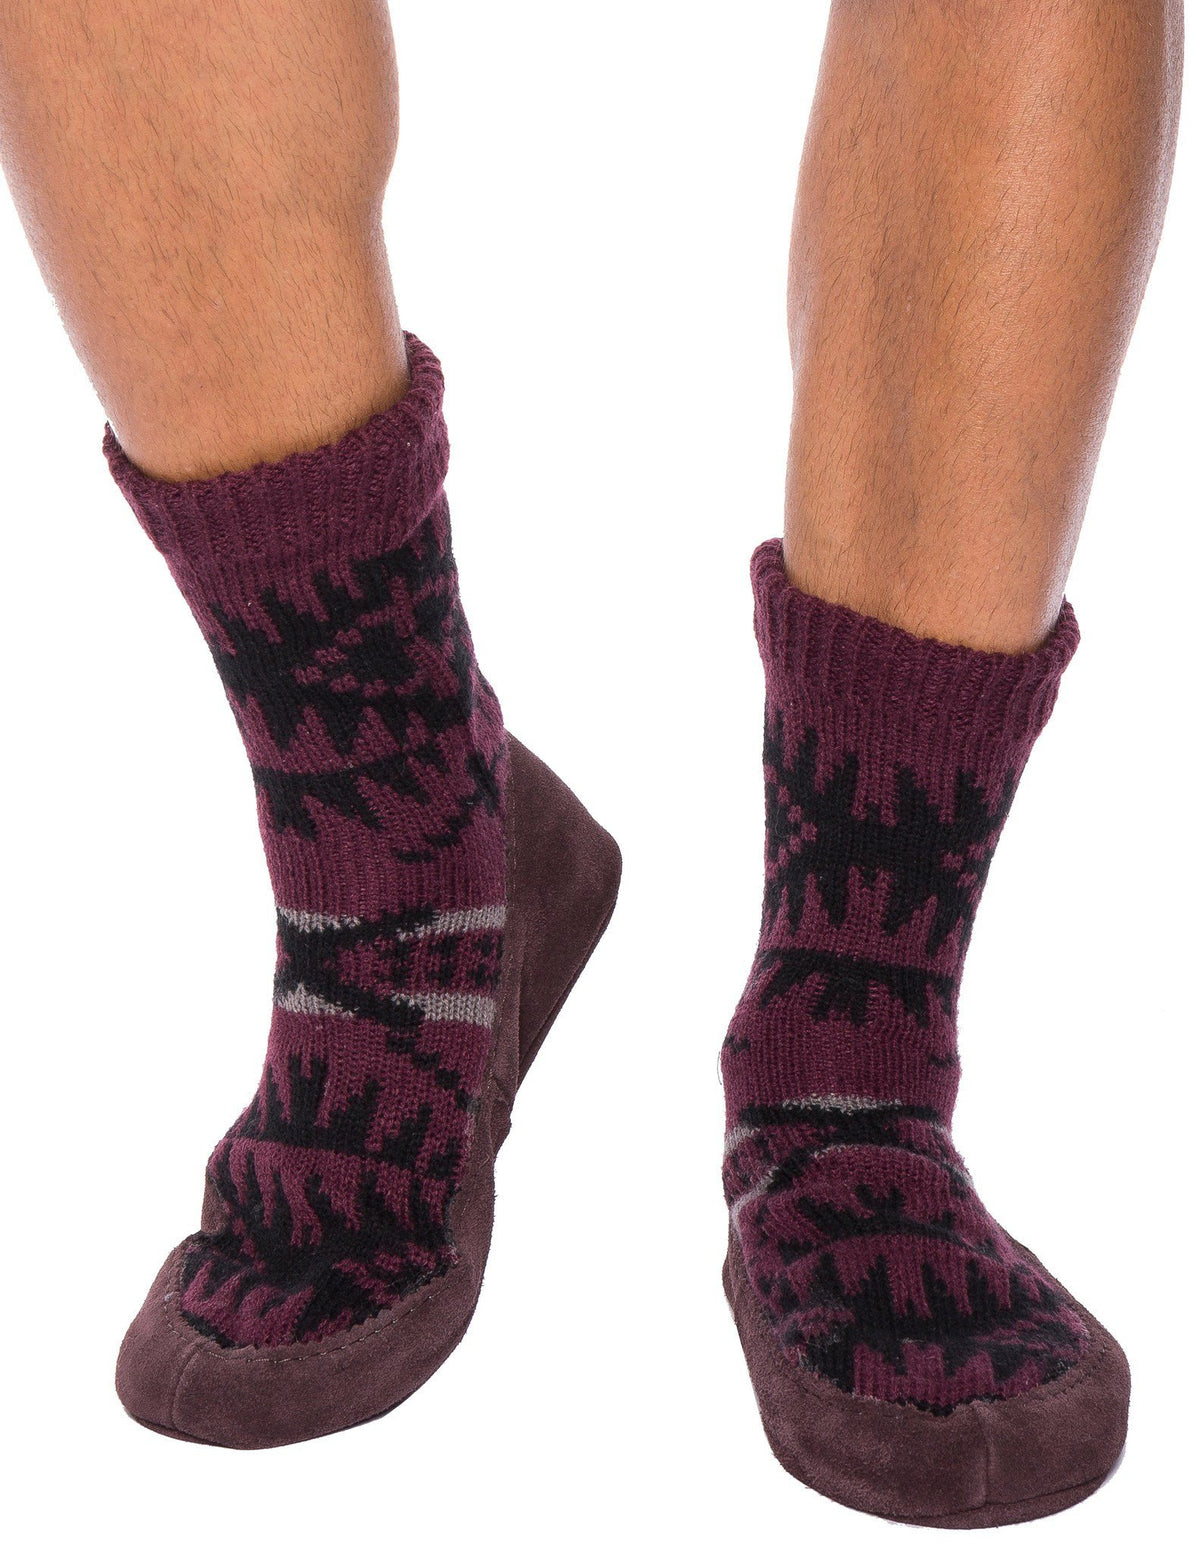 Men's Knit Moccassin Style Slipper Socks with Suede Sole - Fig/Black